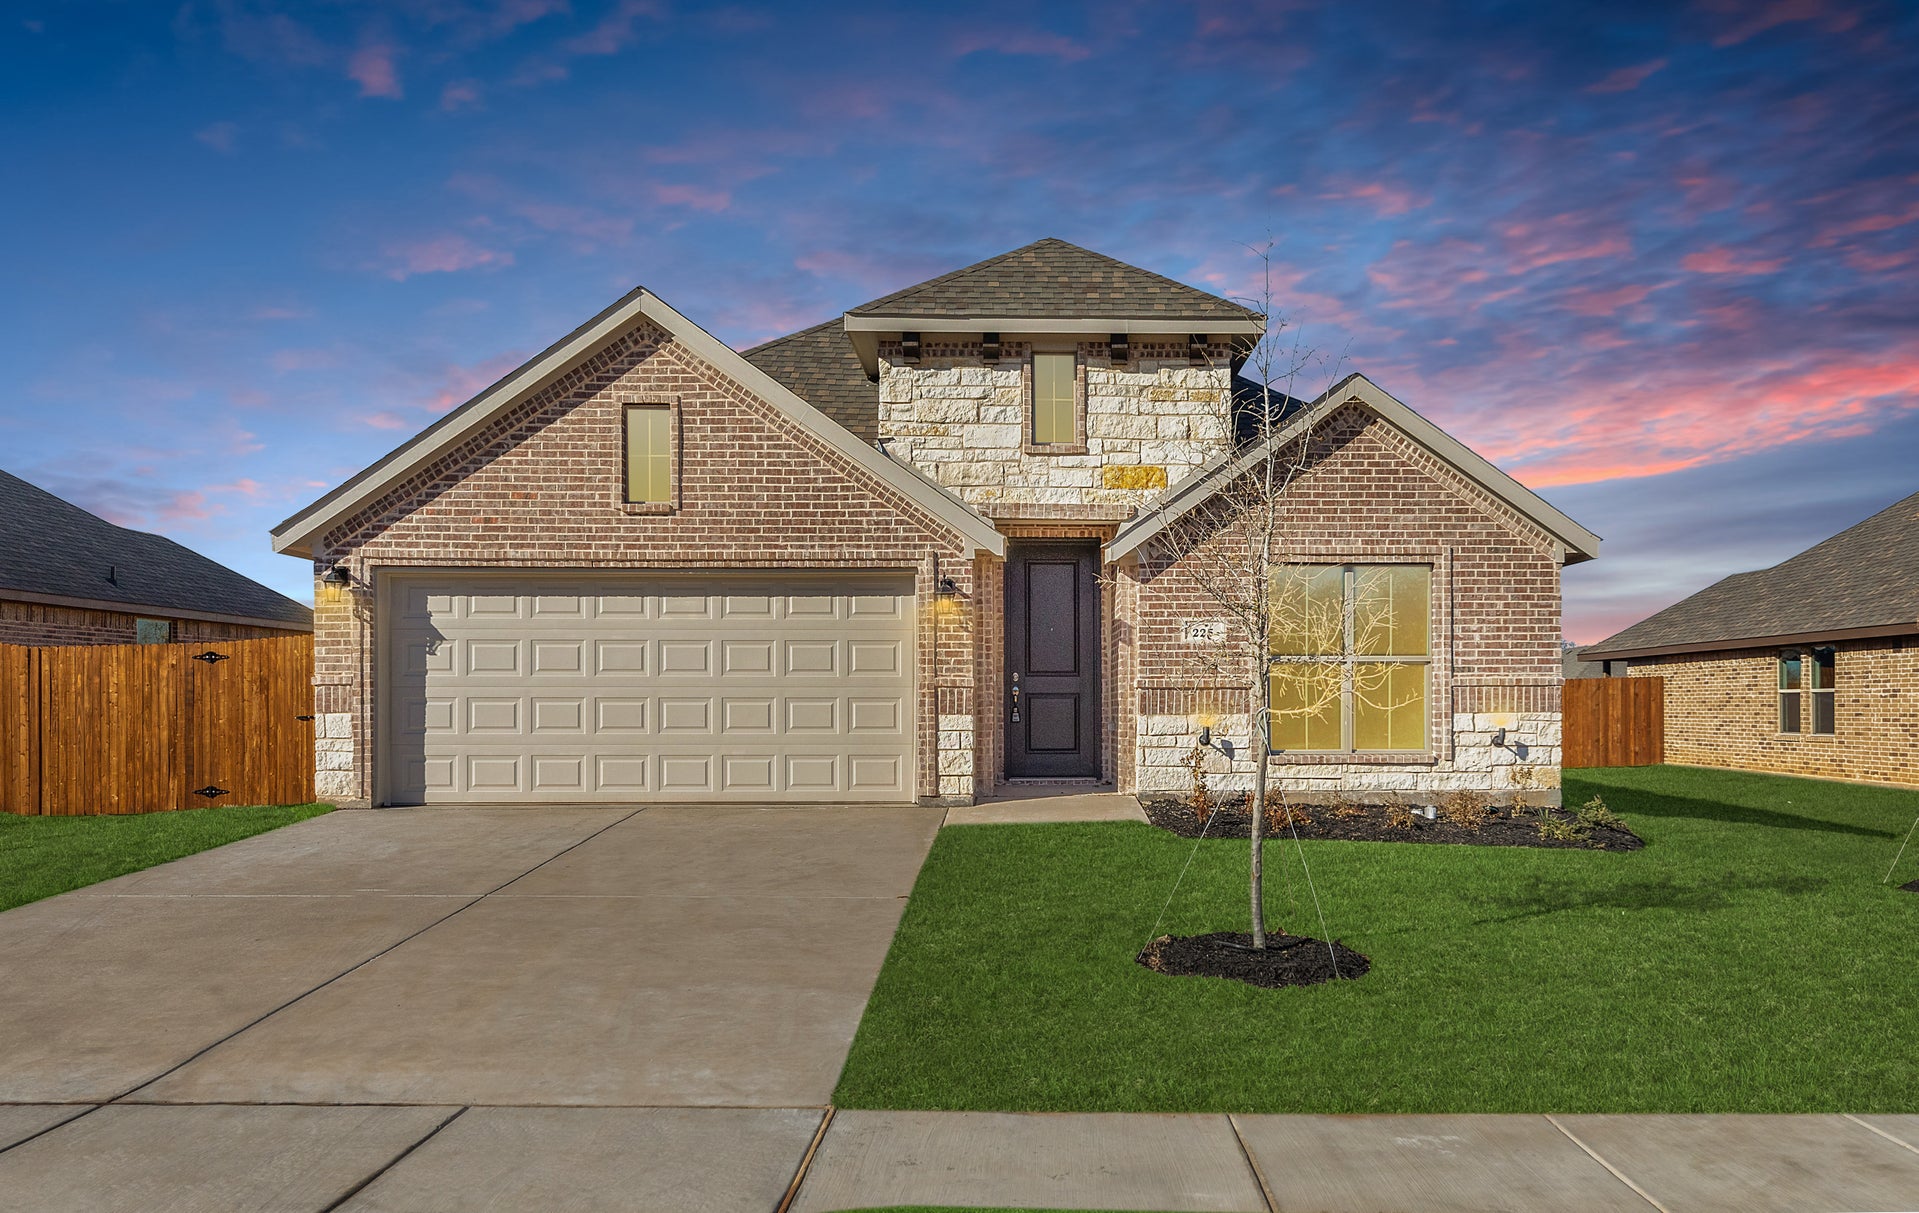 1912 B with Stone. 4br New Home in Cleburne, TX